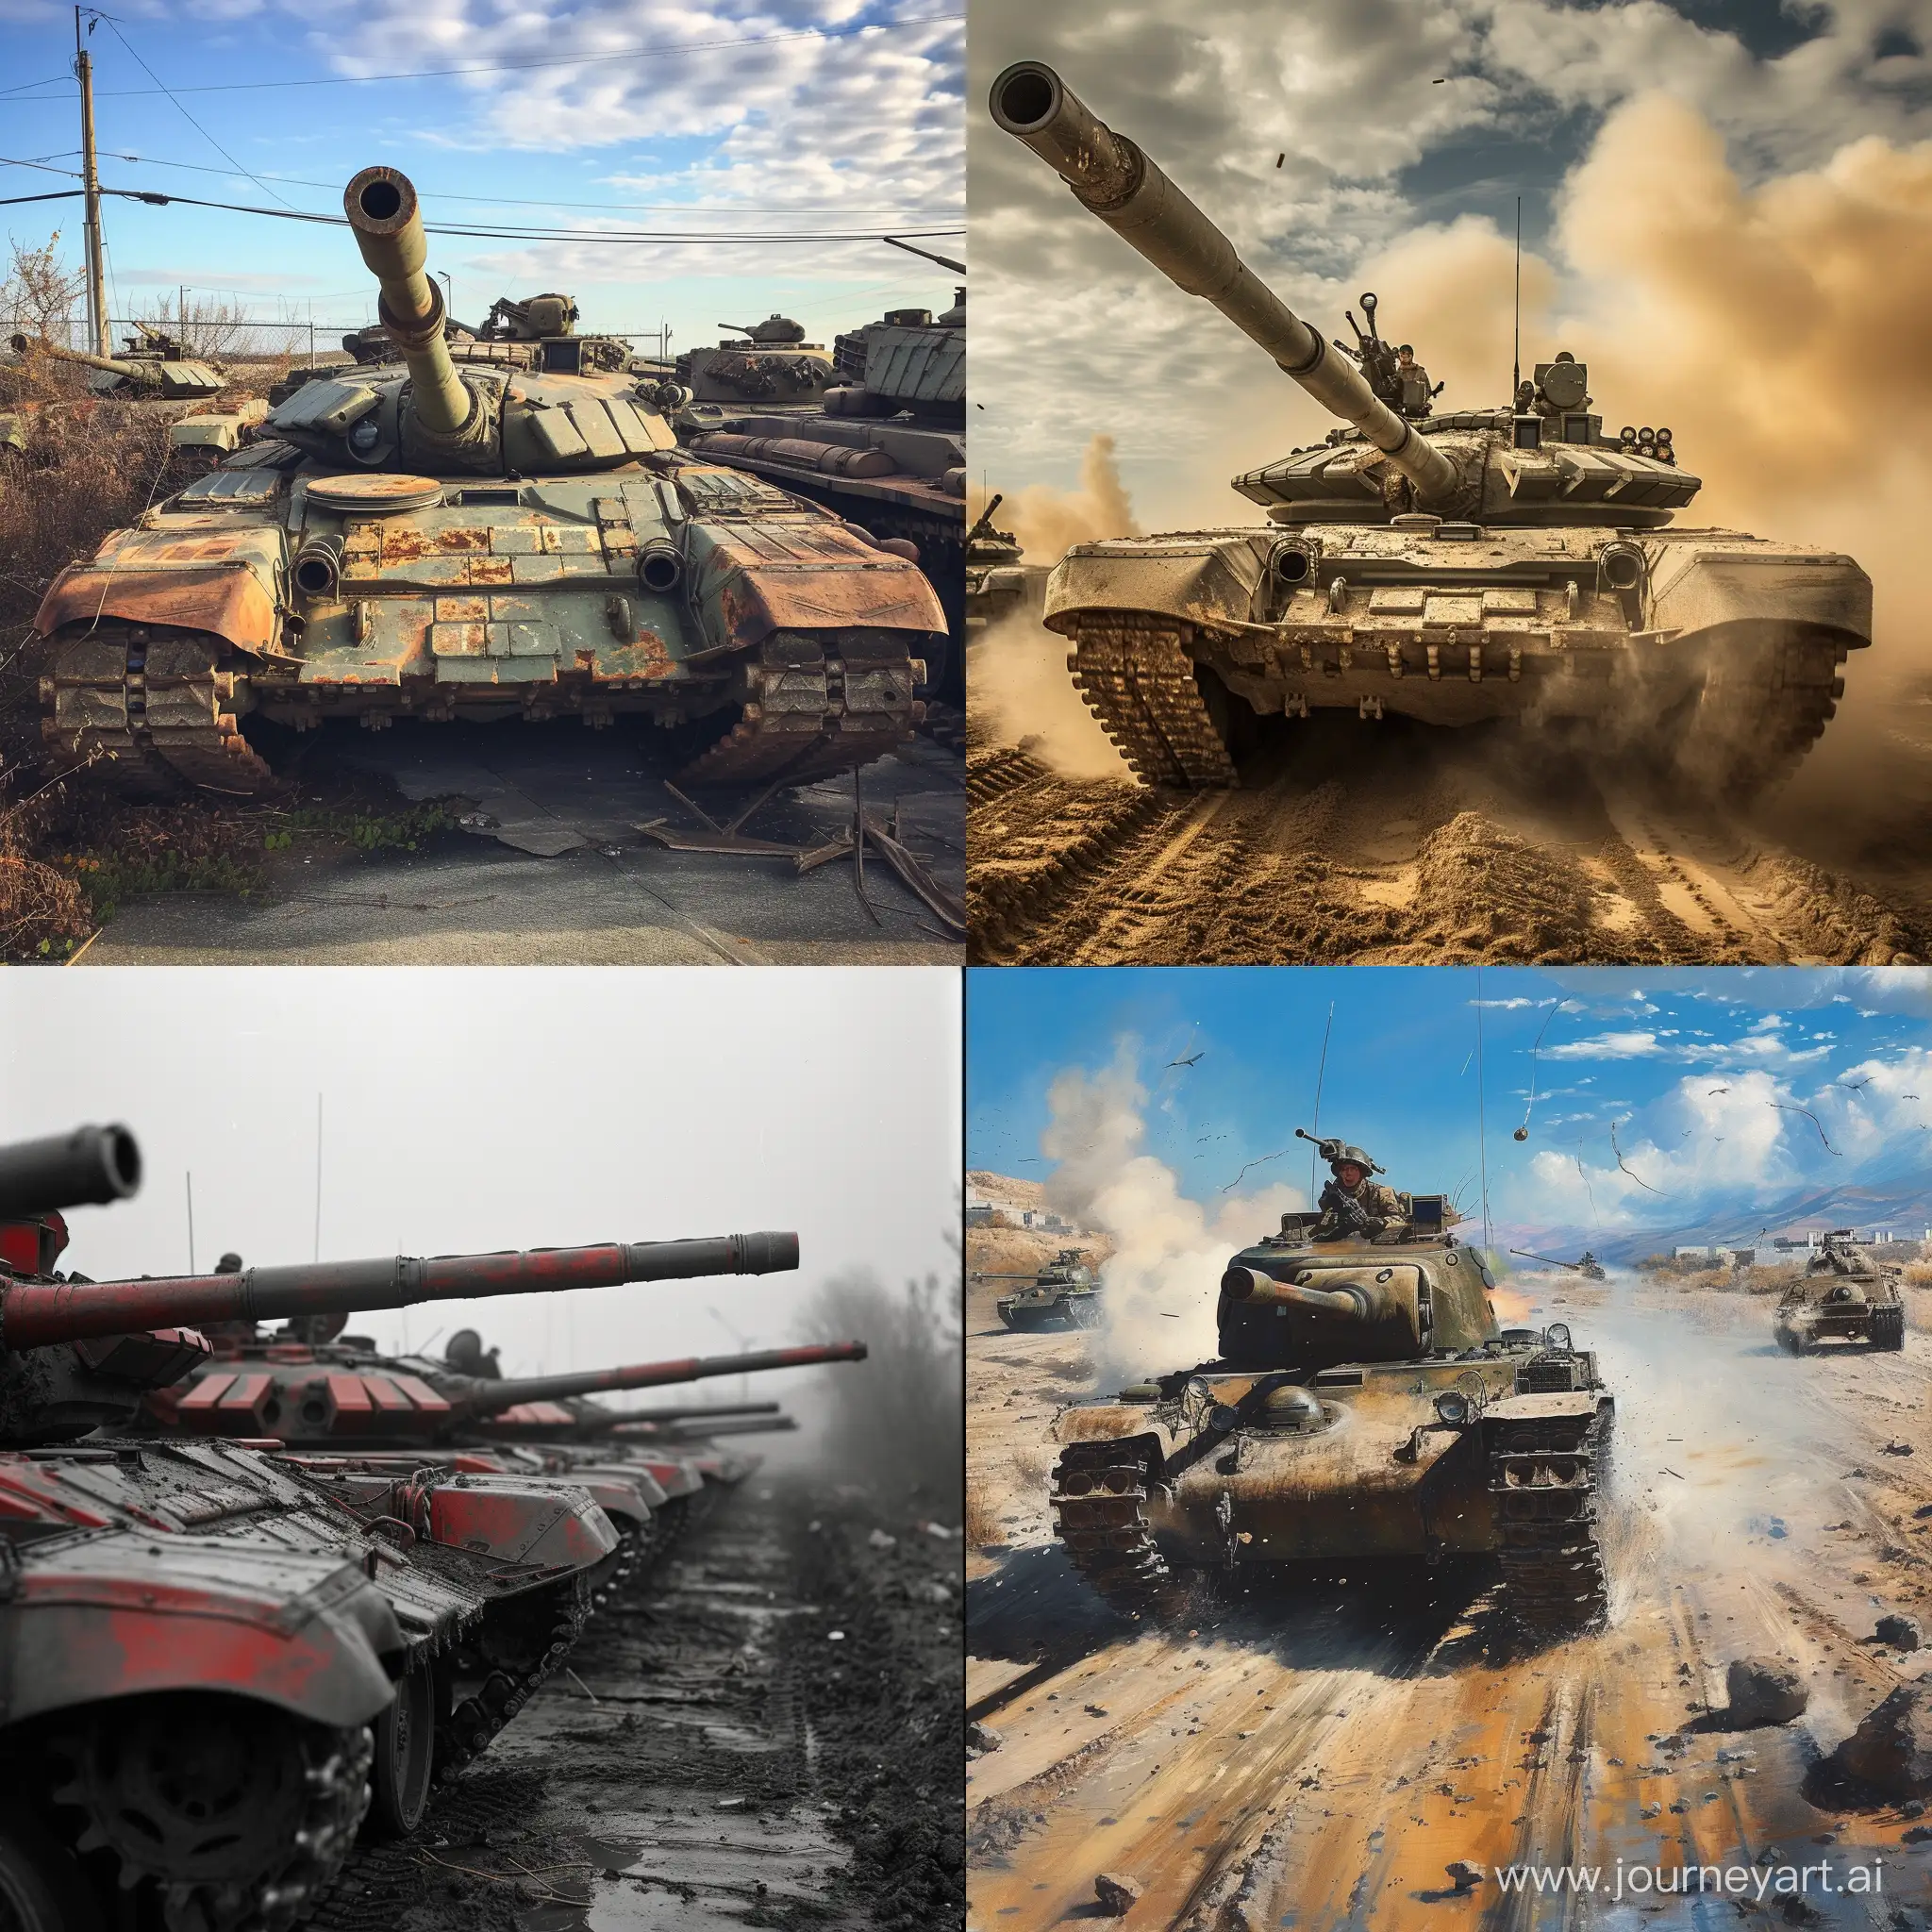 Six-Powerful-Tanks-in-a-Square-Formation